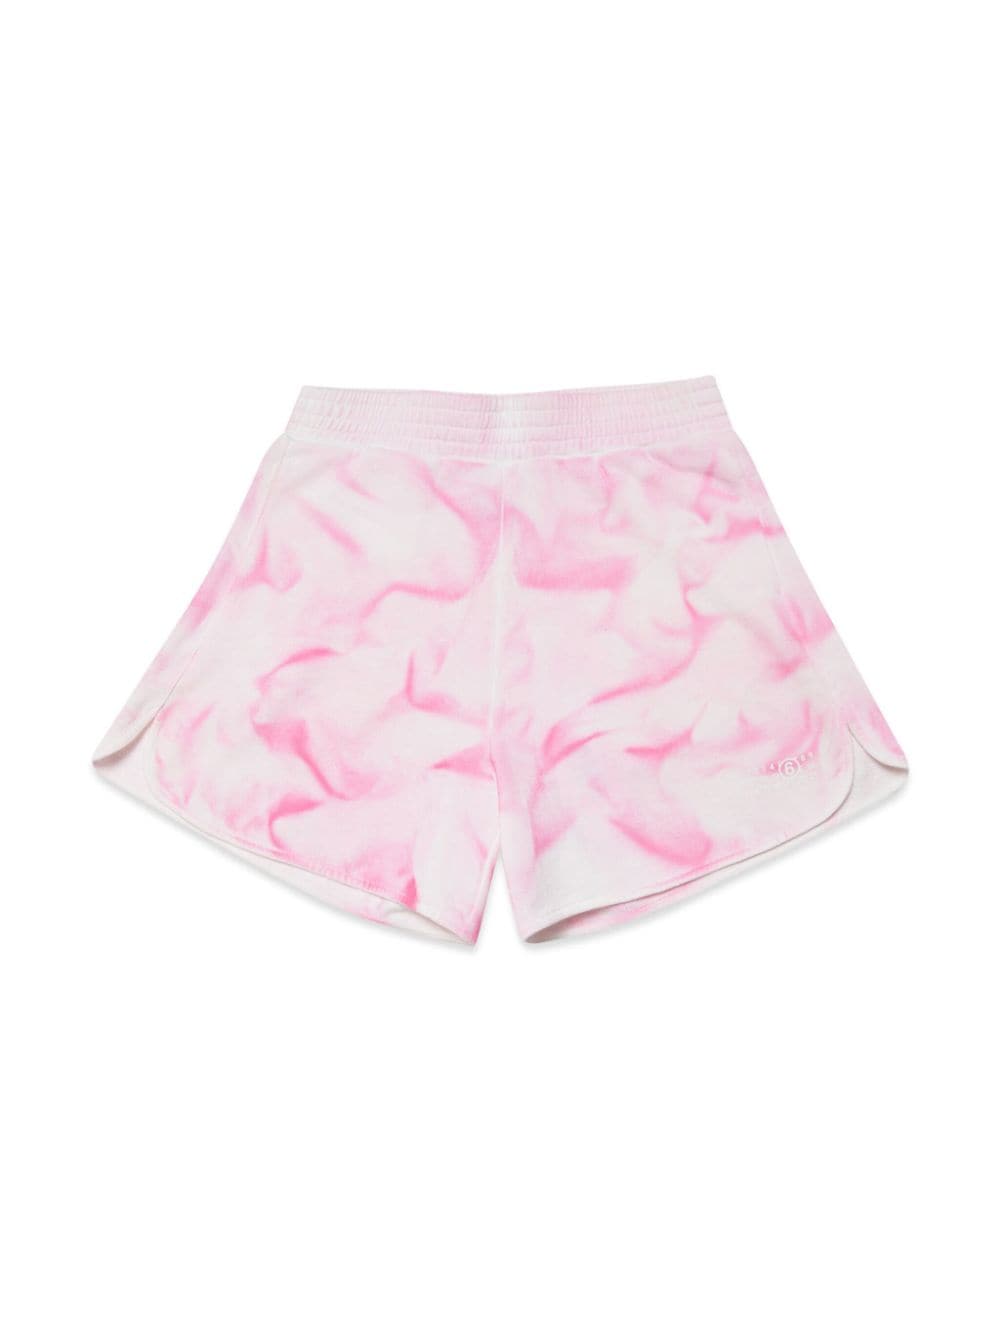 MM6 Maison Margiela Kids numbers-motif abstract-print shorts - Pink von MM6 Maison Margiela Kids